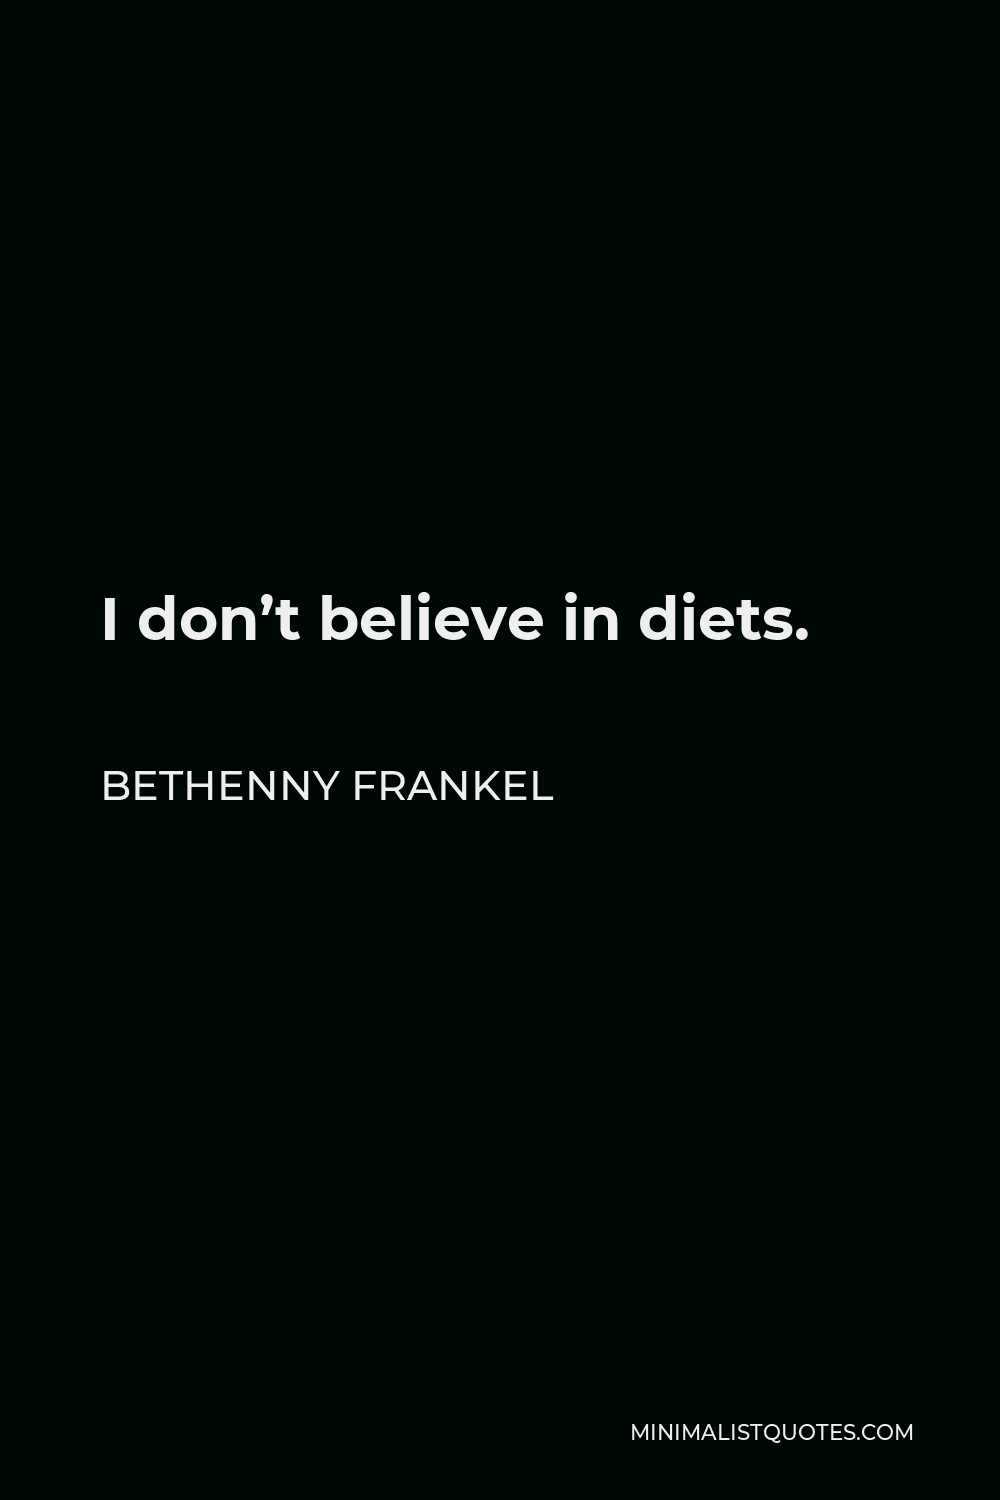 Bethenny Frankel Quote - I don’t believe in diets.